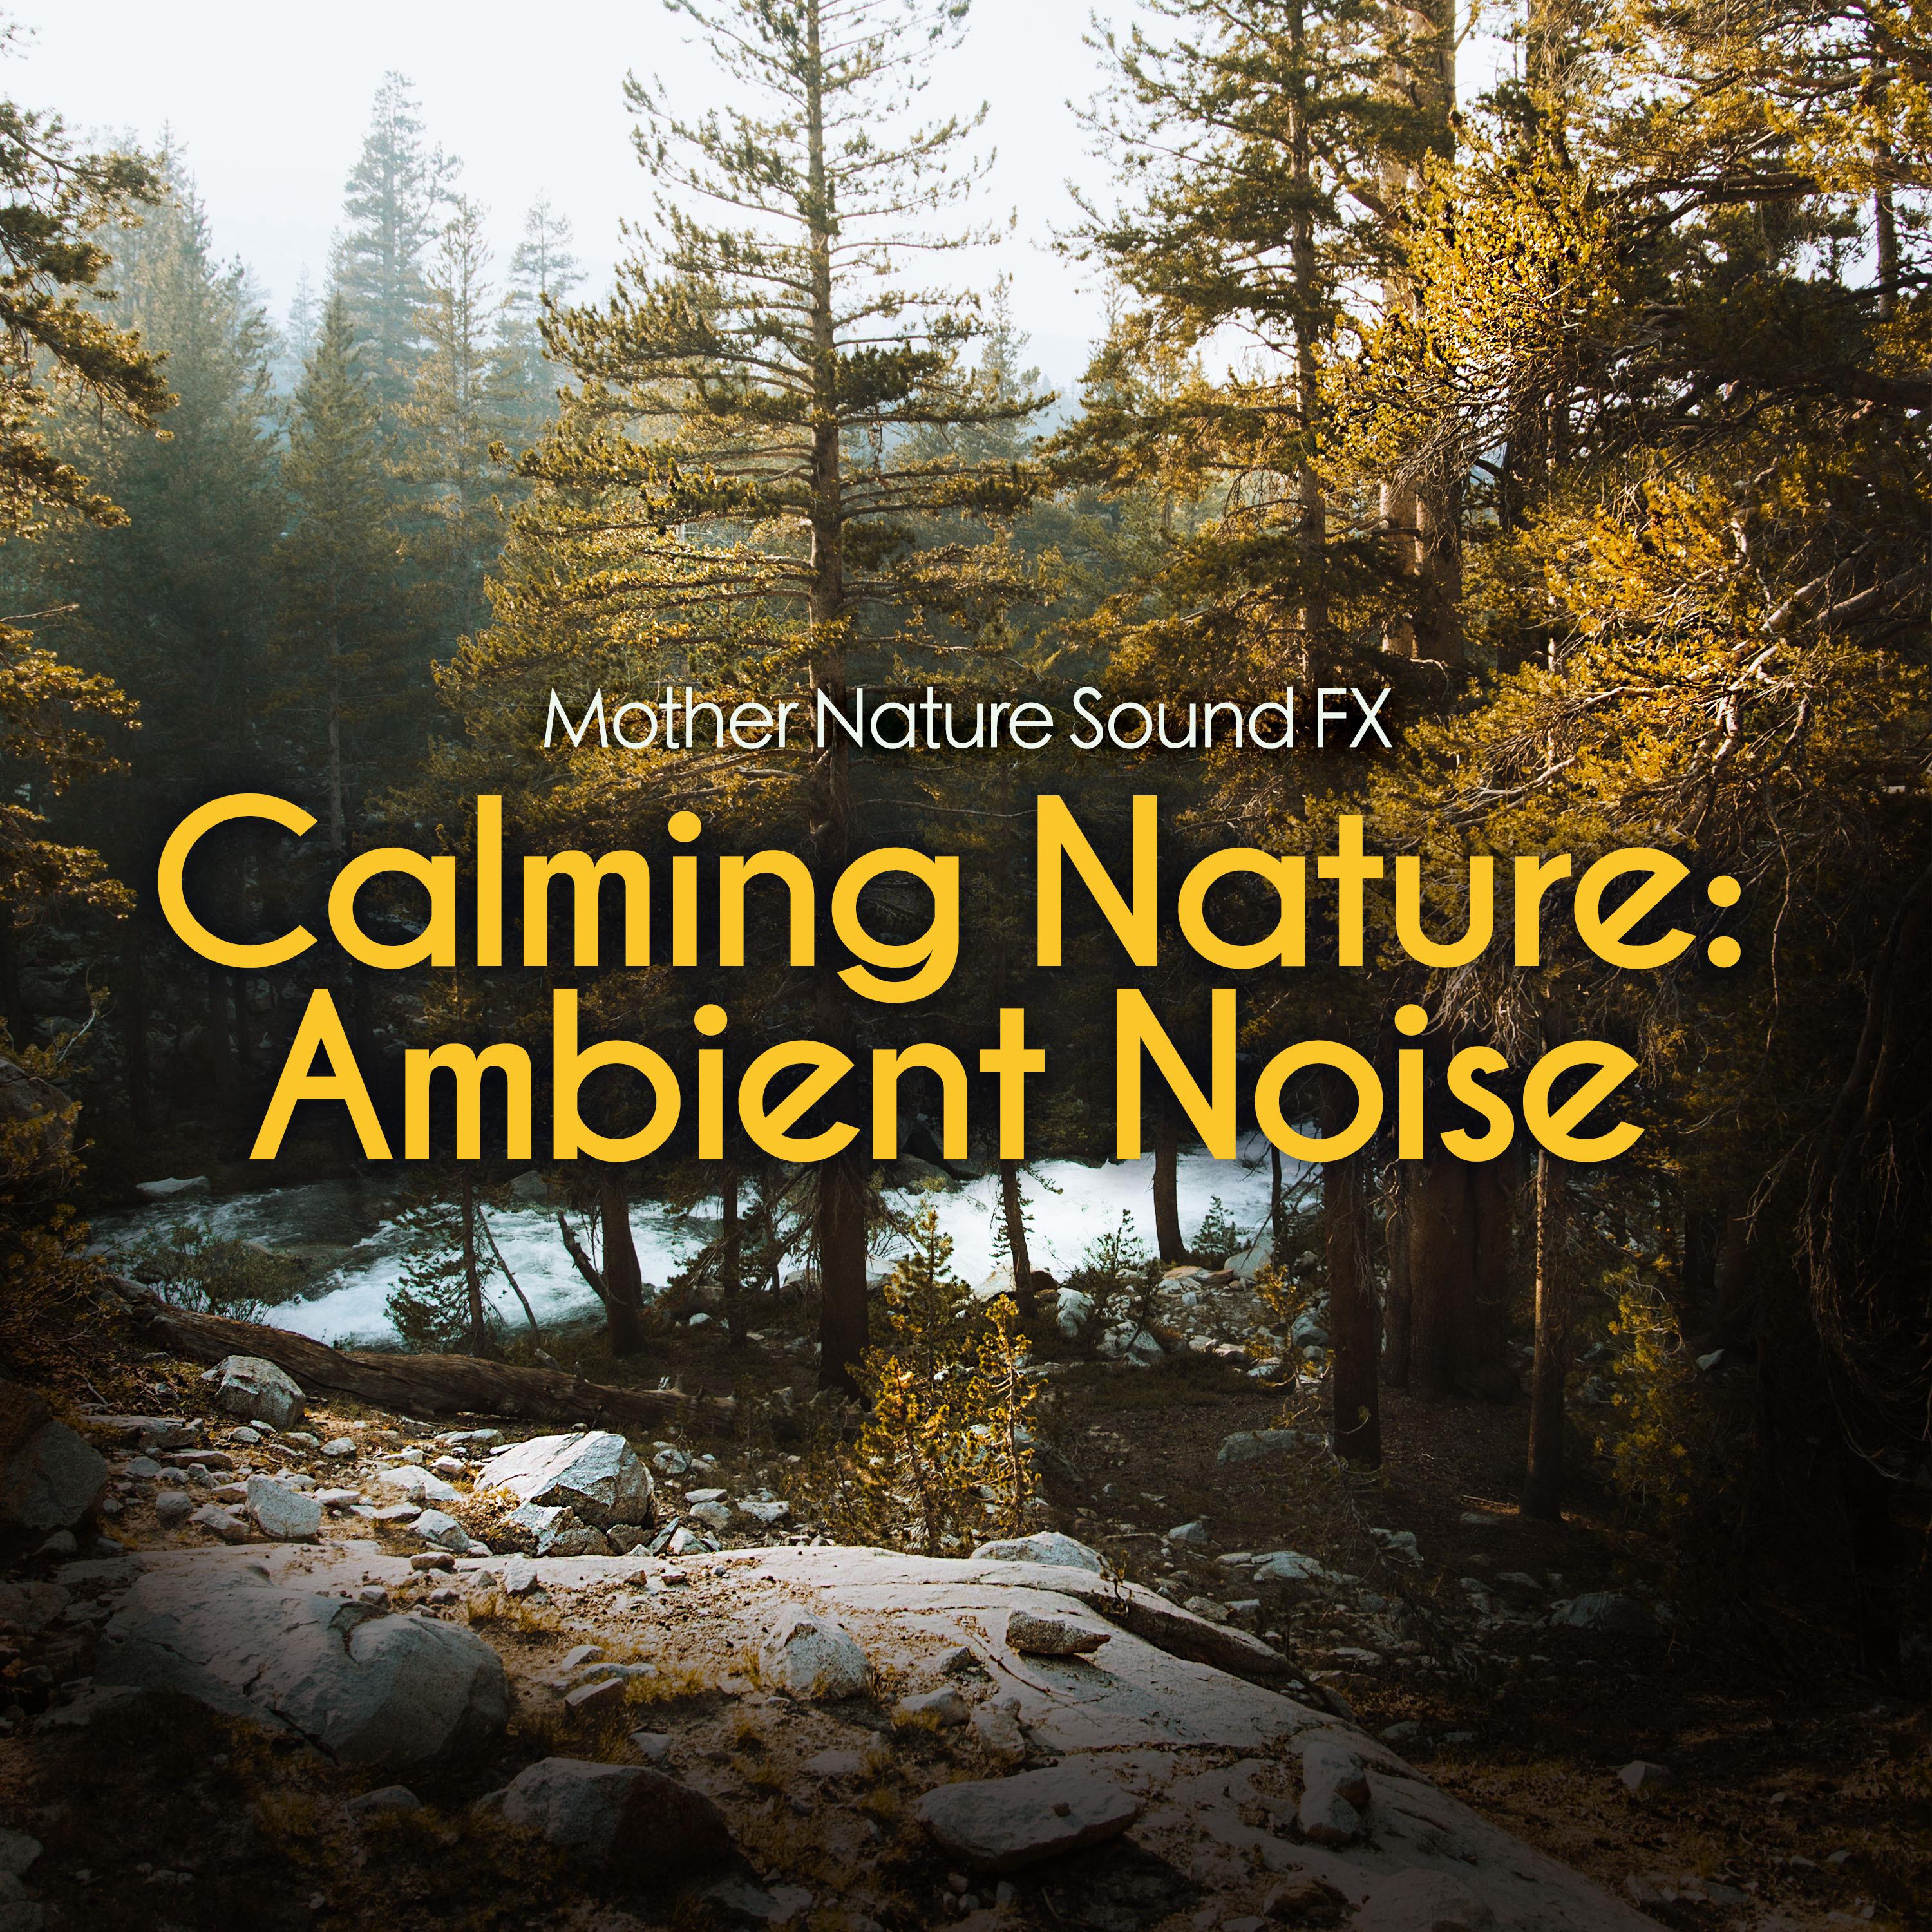 Calming Nature: Ambient Noise